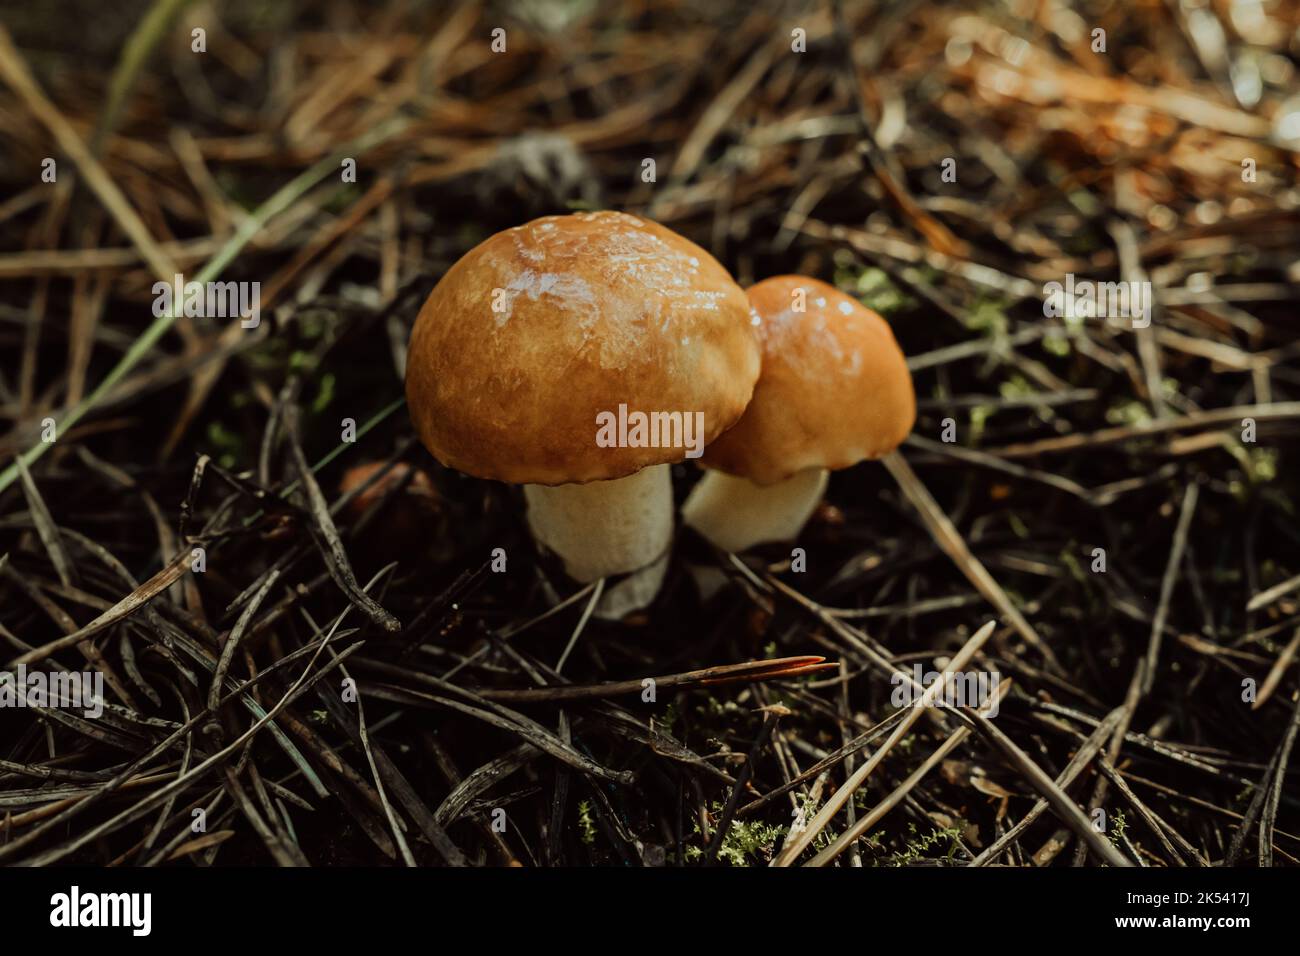 Young slippery Jack Fungi, Suillus luteus on autumn forest background with pine needles, close-up view. Harvest mushroom concept Stock Photo